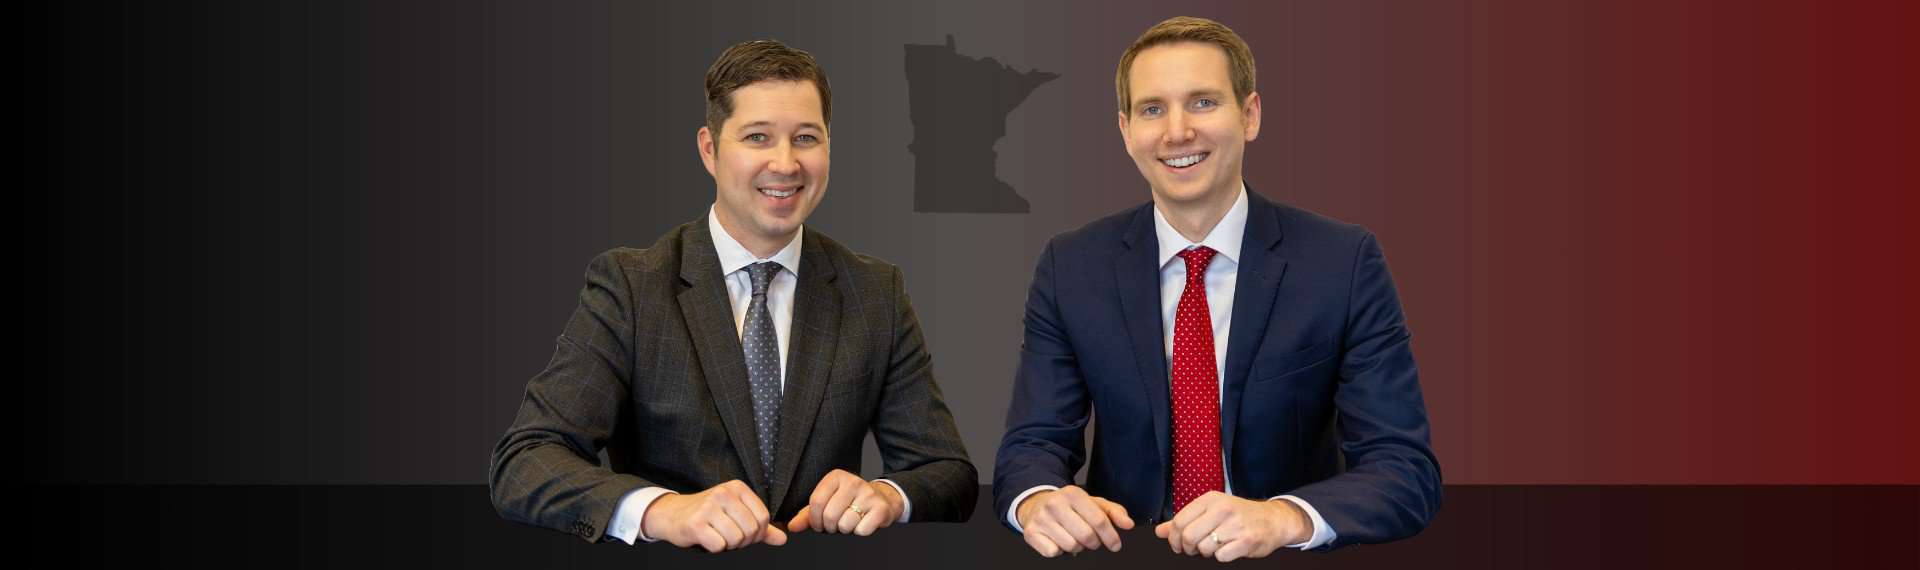 Criminal defense lawyers sitting at a table with the state of Minnesota outline between them